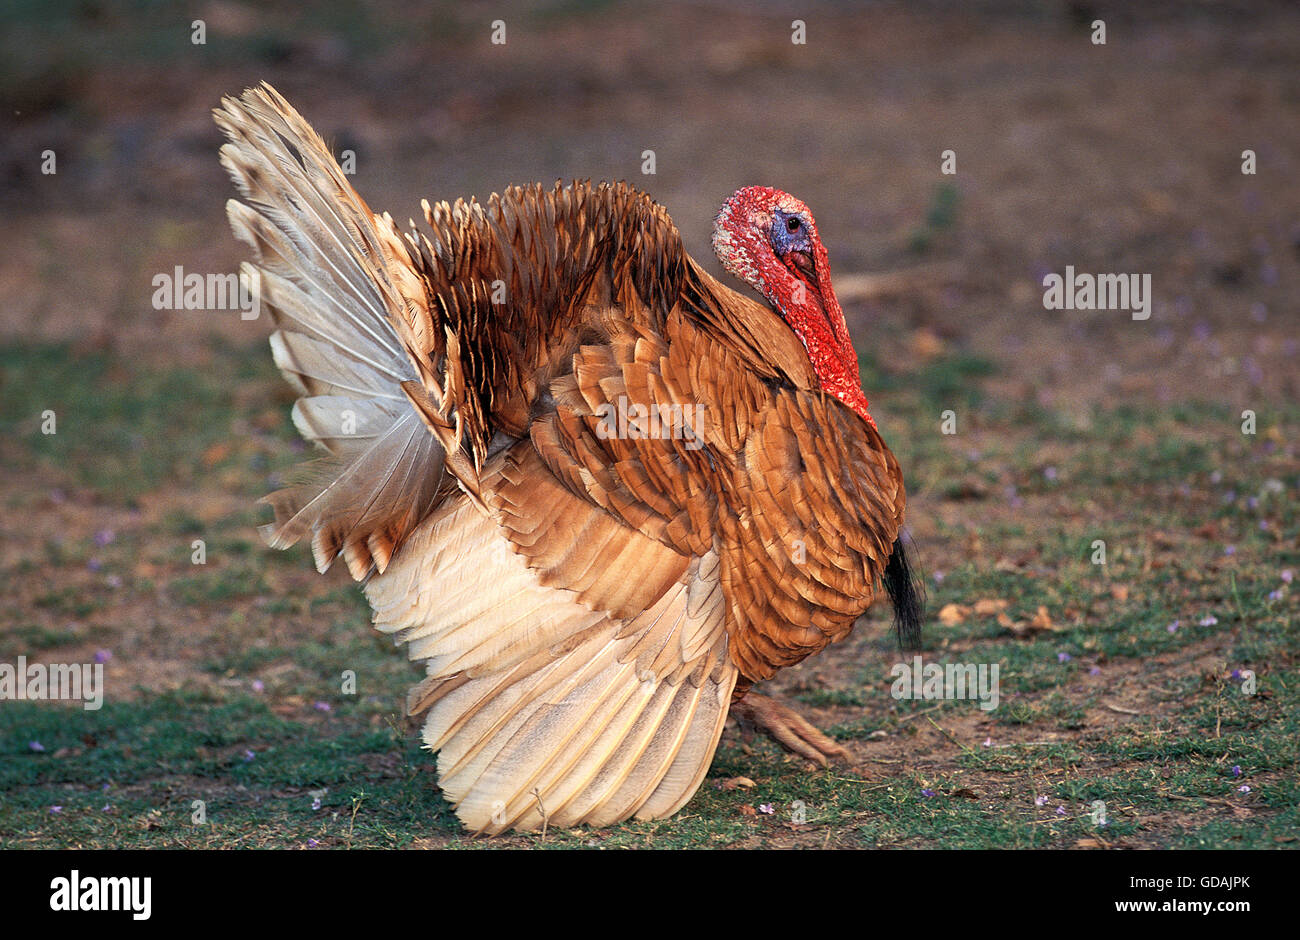 ARDENNES RED TURKEY, A FRENCH BREED, MALE SPREADING TAIL FEATHERS IN COURTSHIP DISPLAY Stock Photo